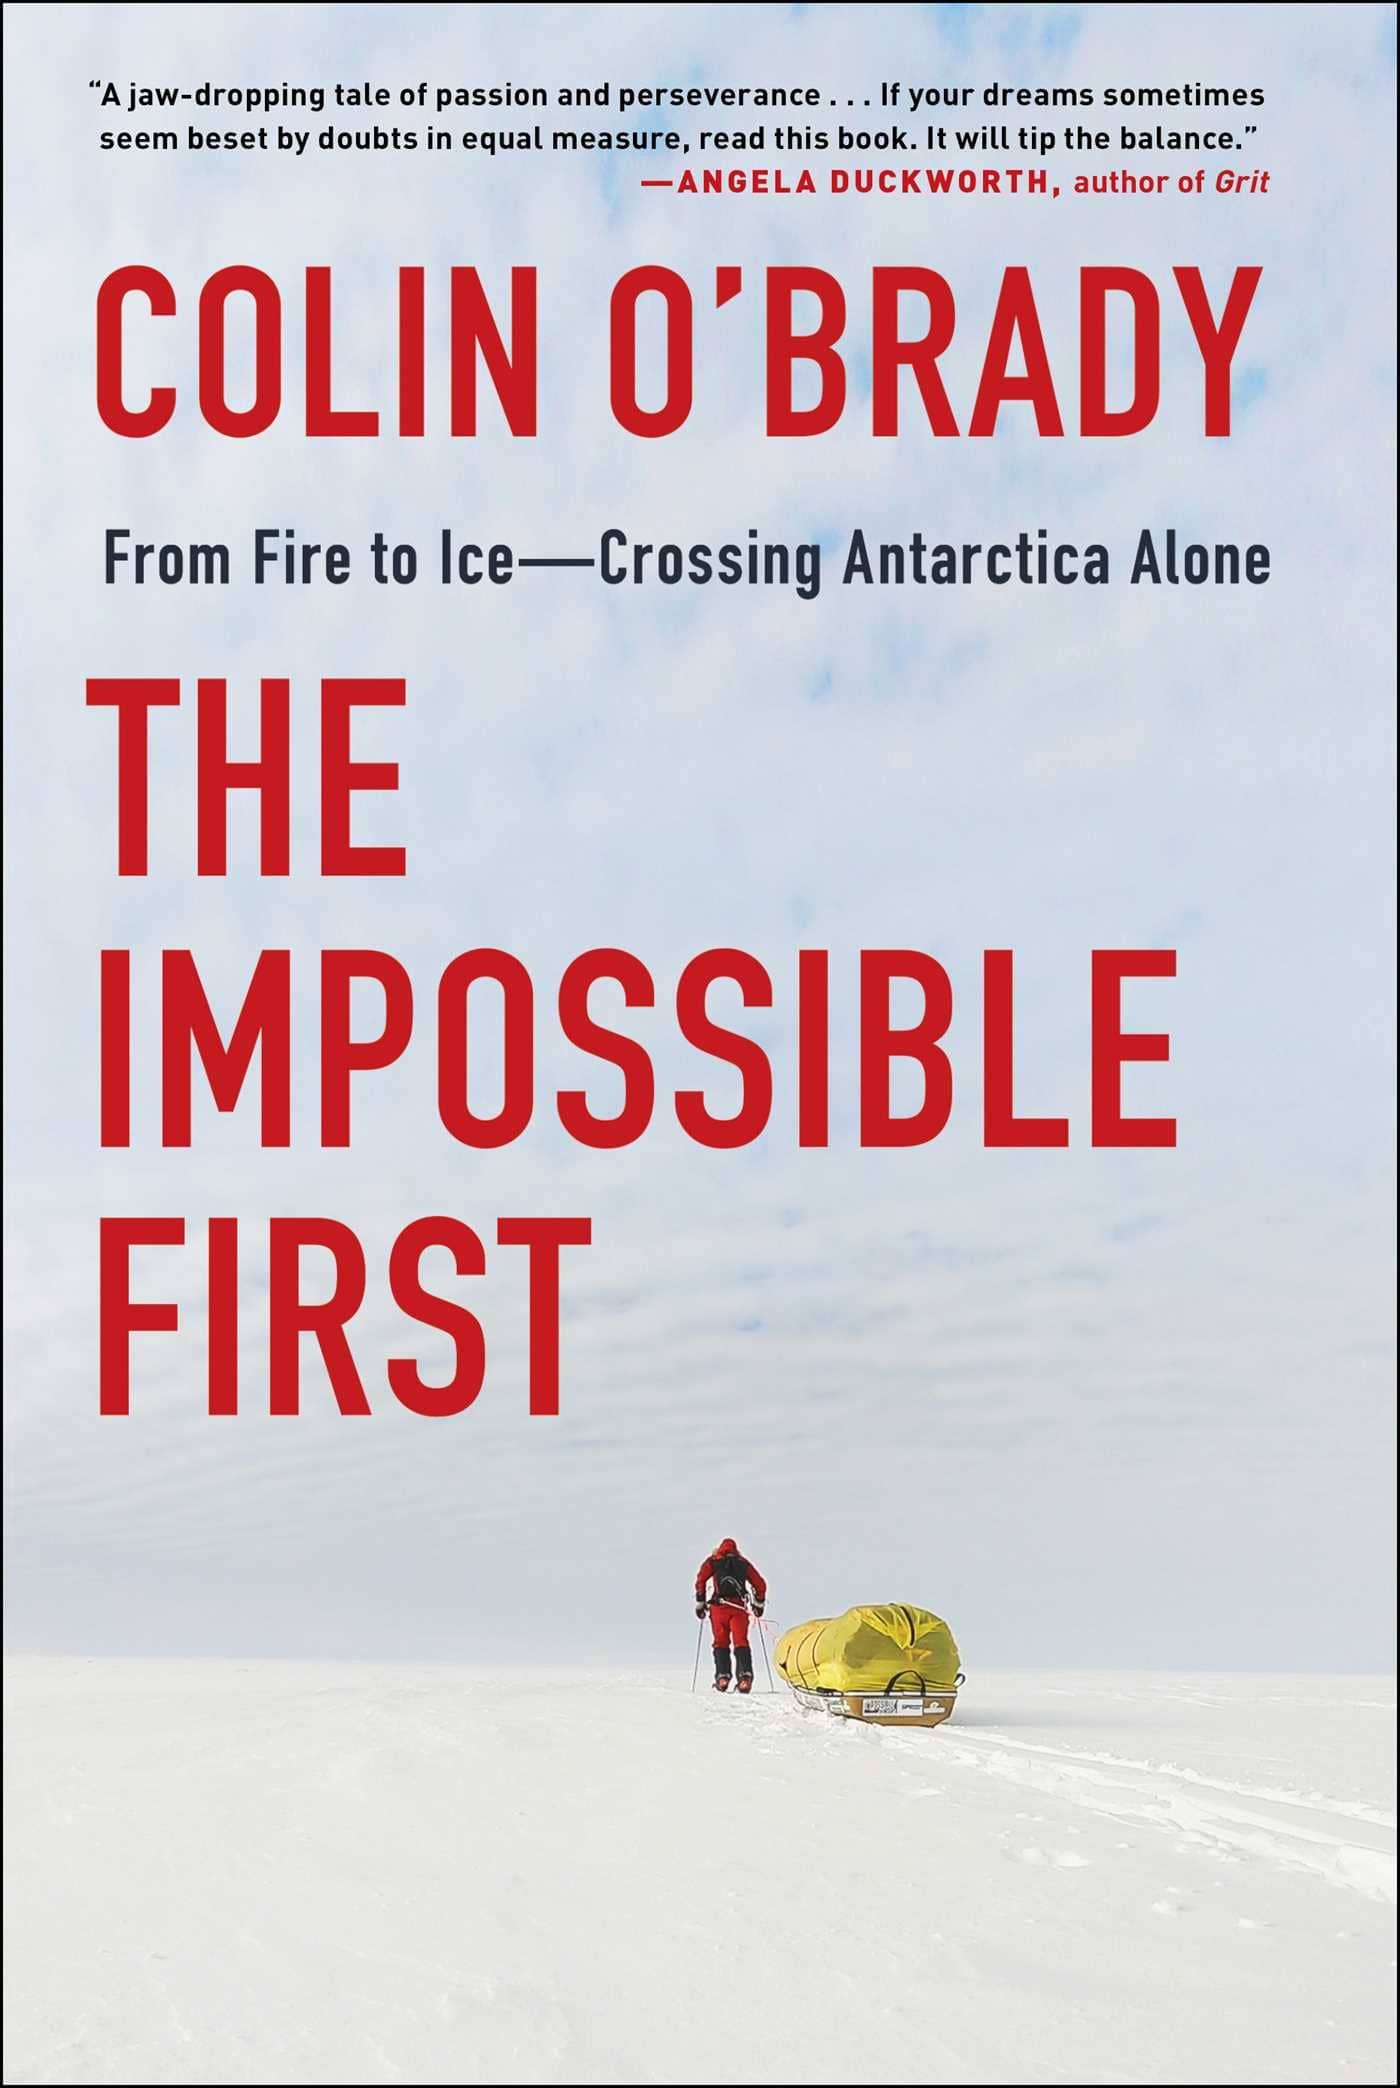 The Impossible First: From Fire to Ice - Crossing Antarctica Alone book cover